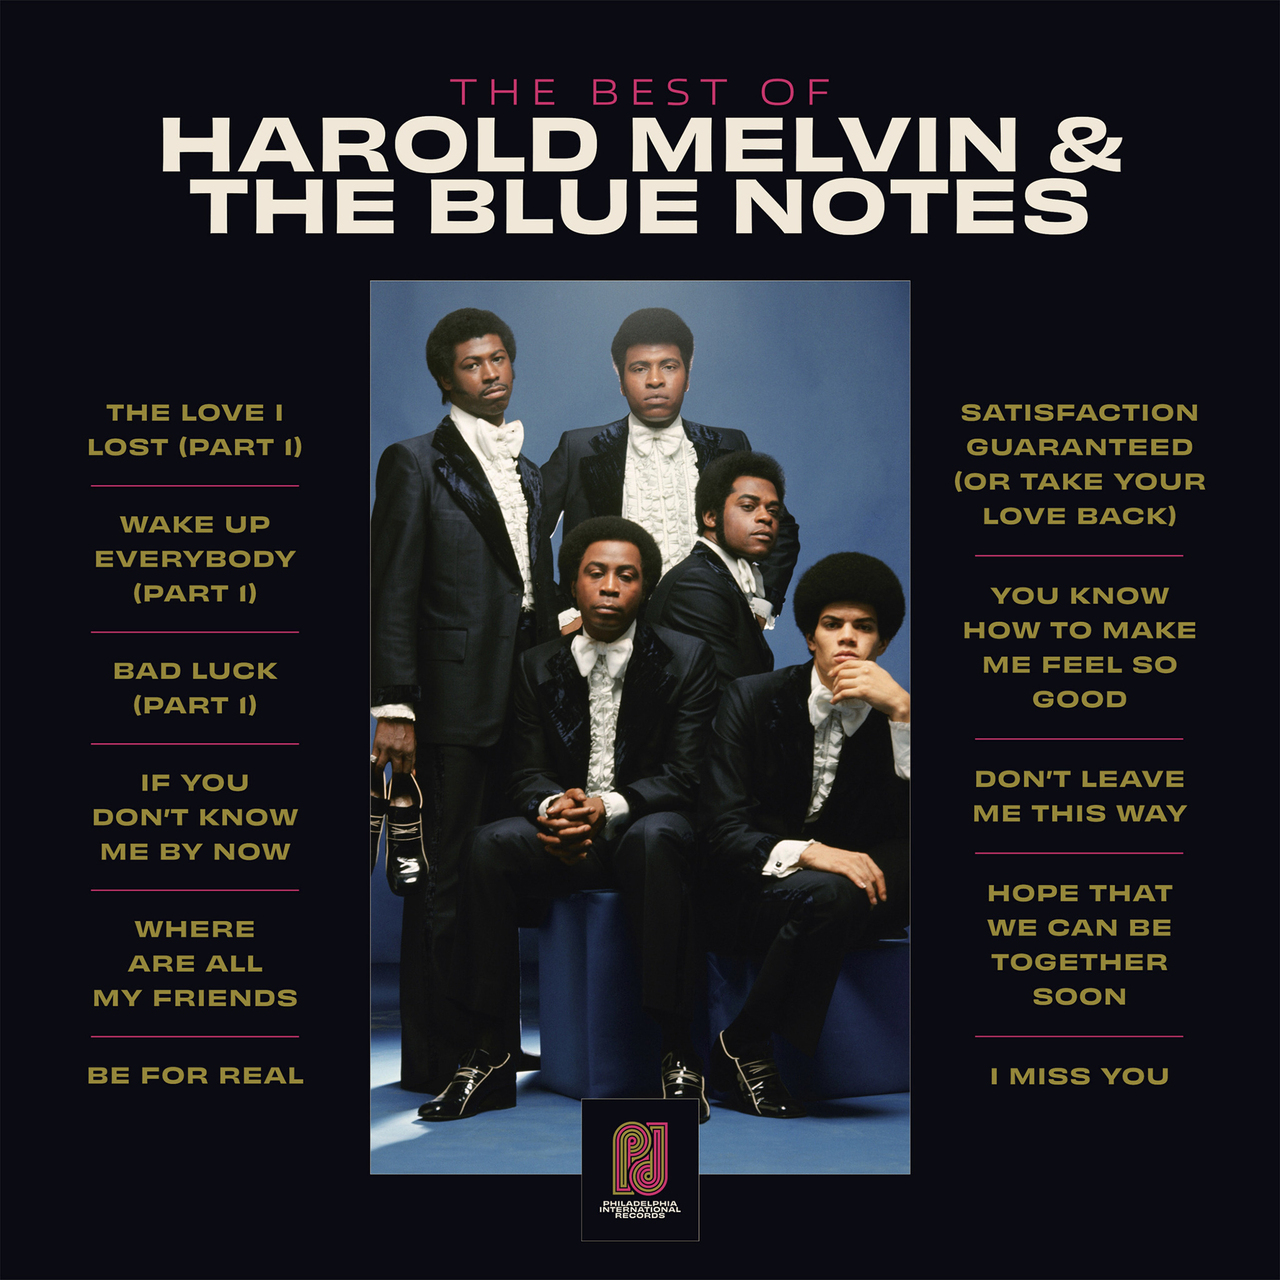 The best of Harold Melvin and the Bluenotes